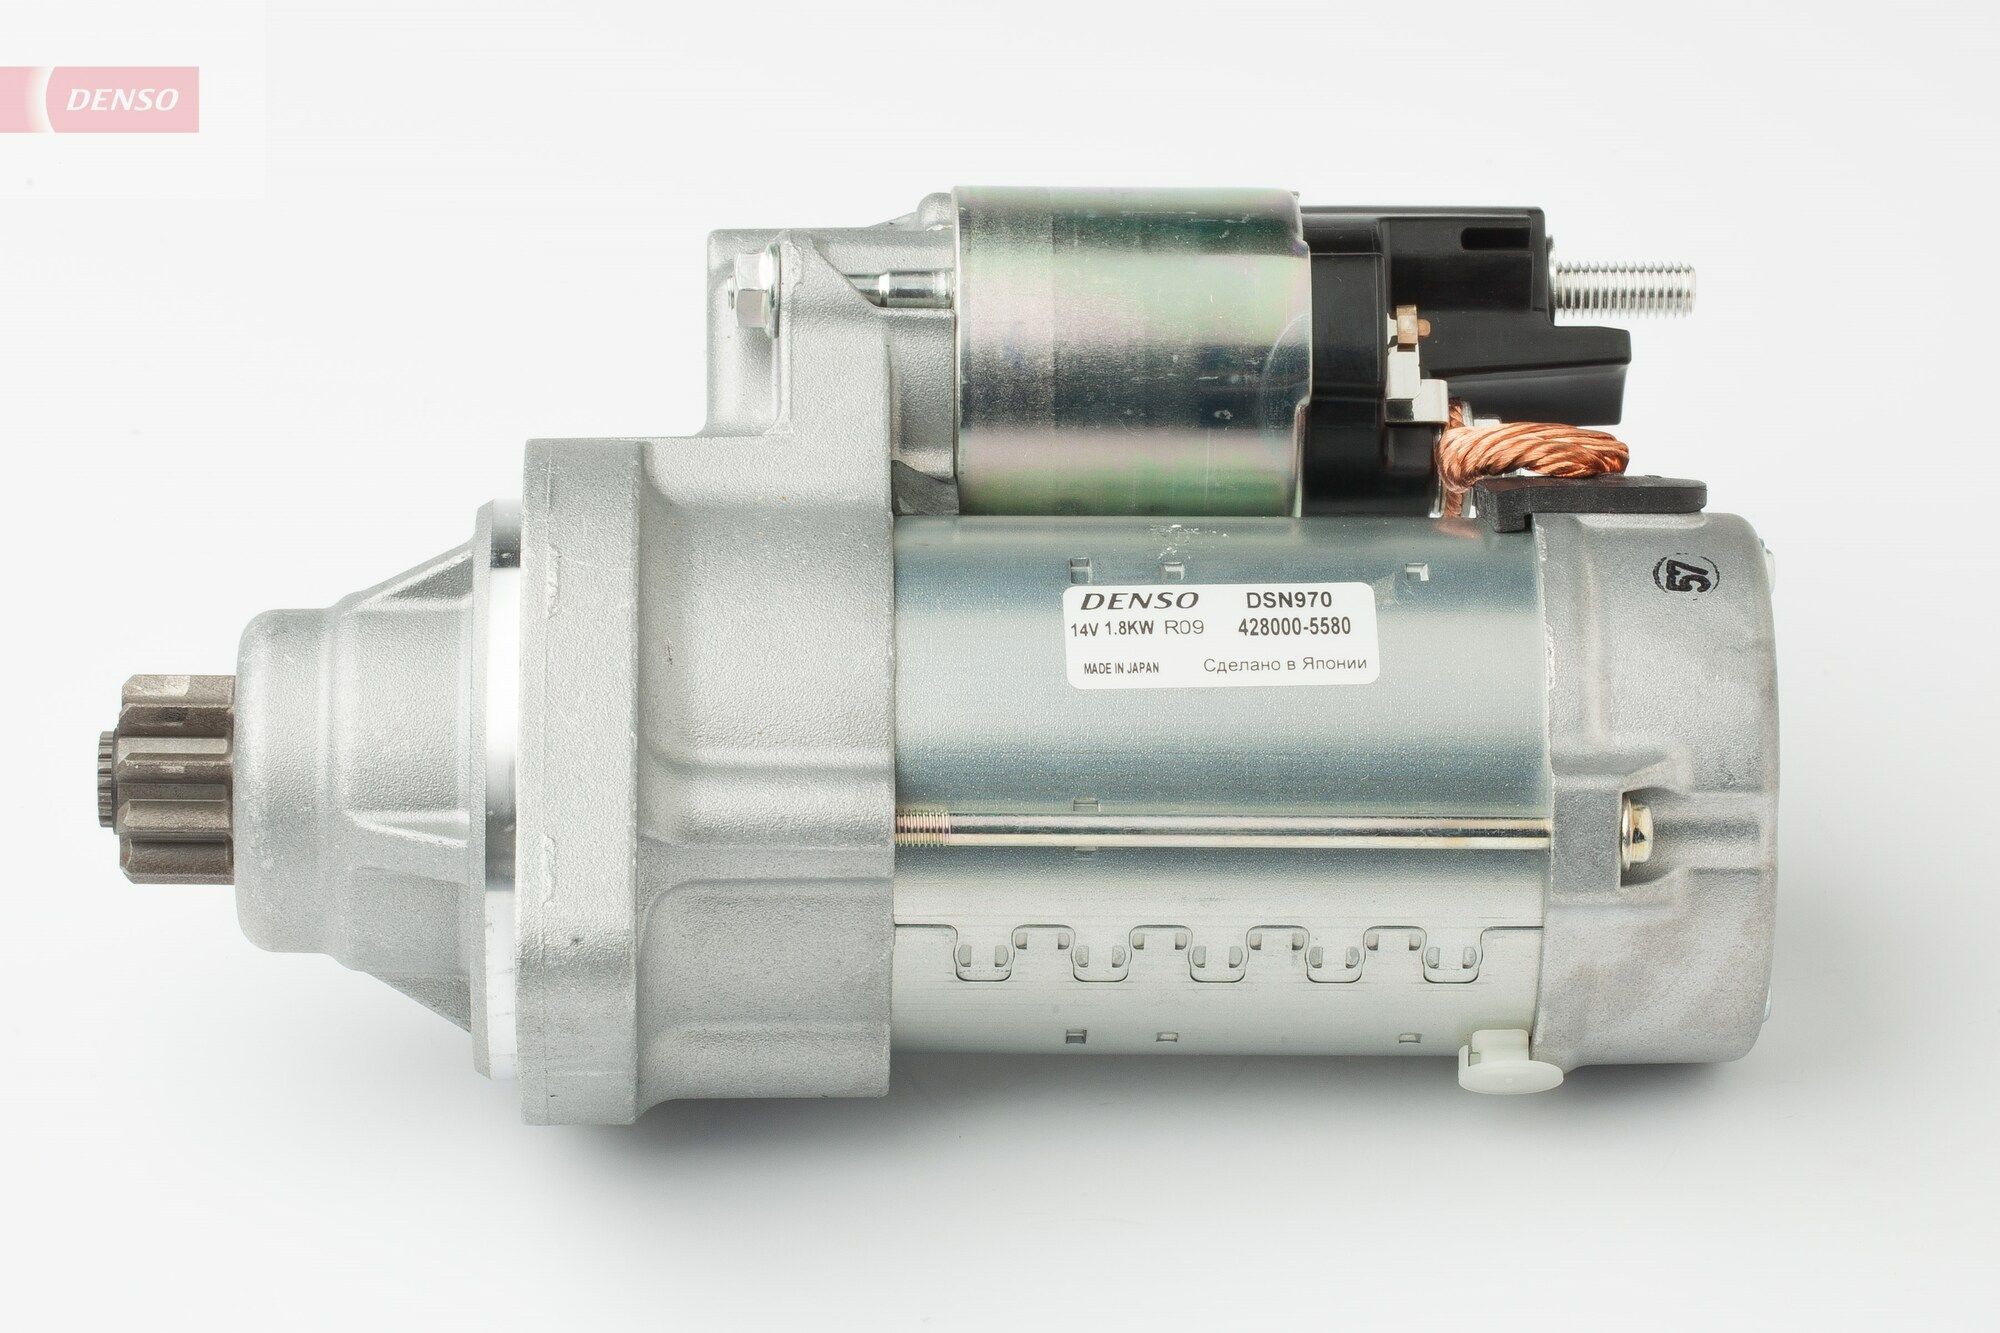 DENSO DSN970 Starter motor PORSCHE experience and price